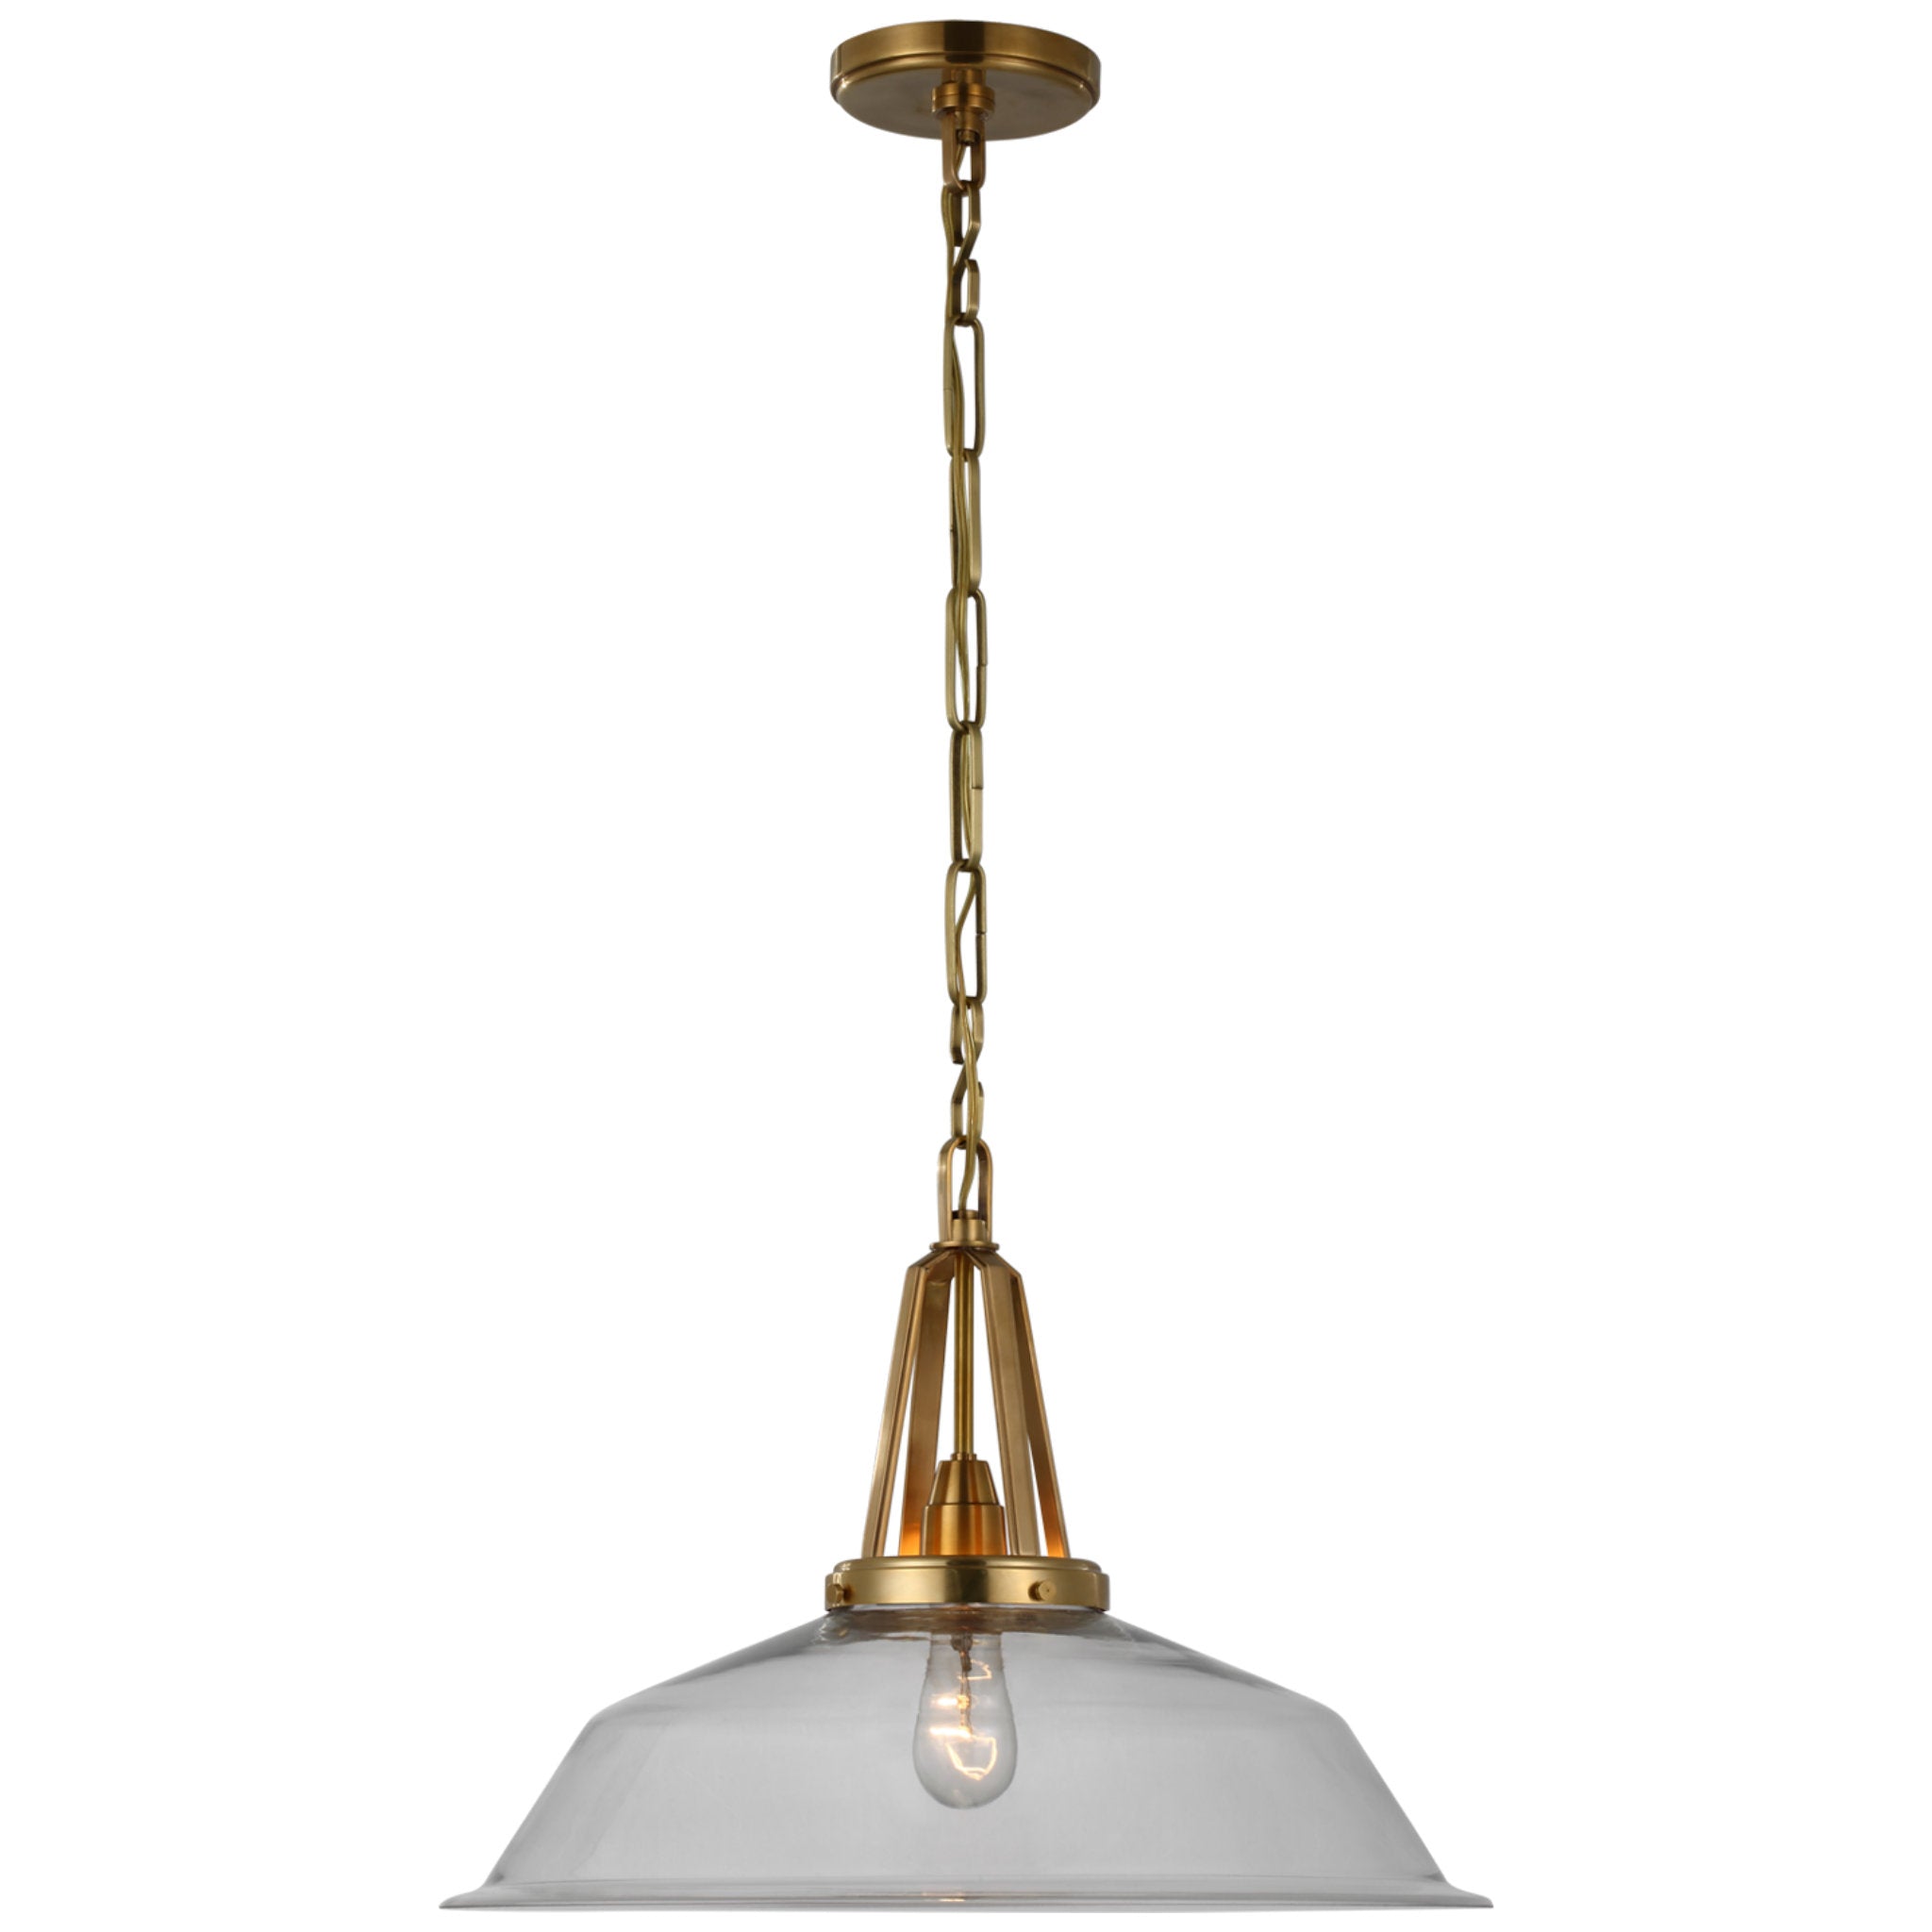 Chapman & Myers Layton 20" Pendant in Antique-Burnished Brass with Clear Glass